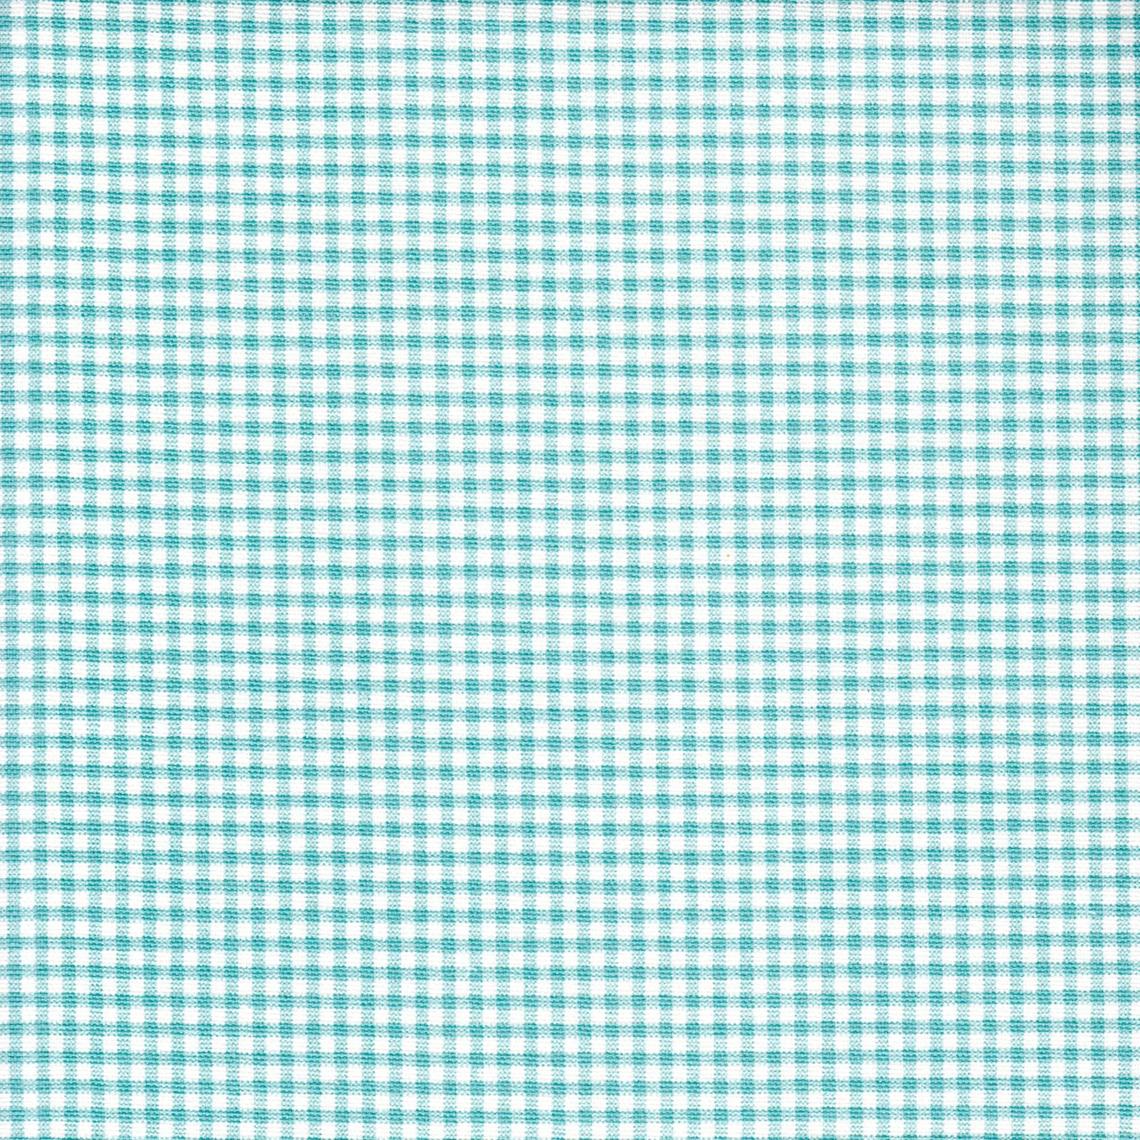 rod pocket curtain panels pair in farmhouse turquoise blue gingham check on cream